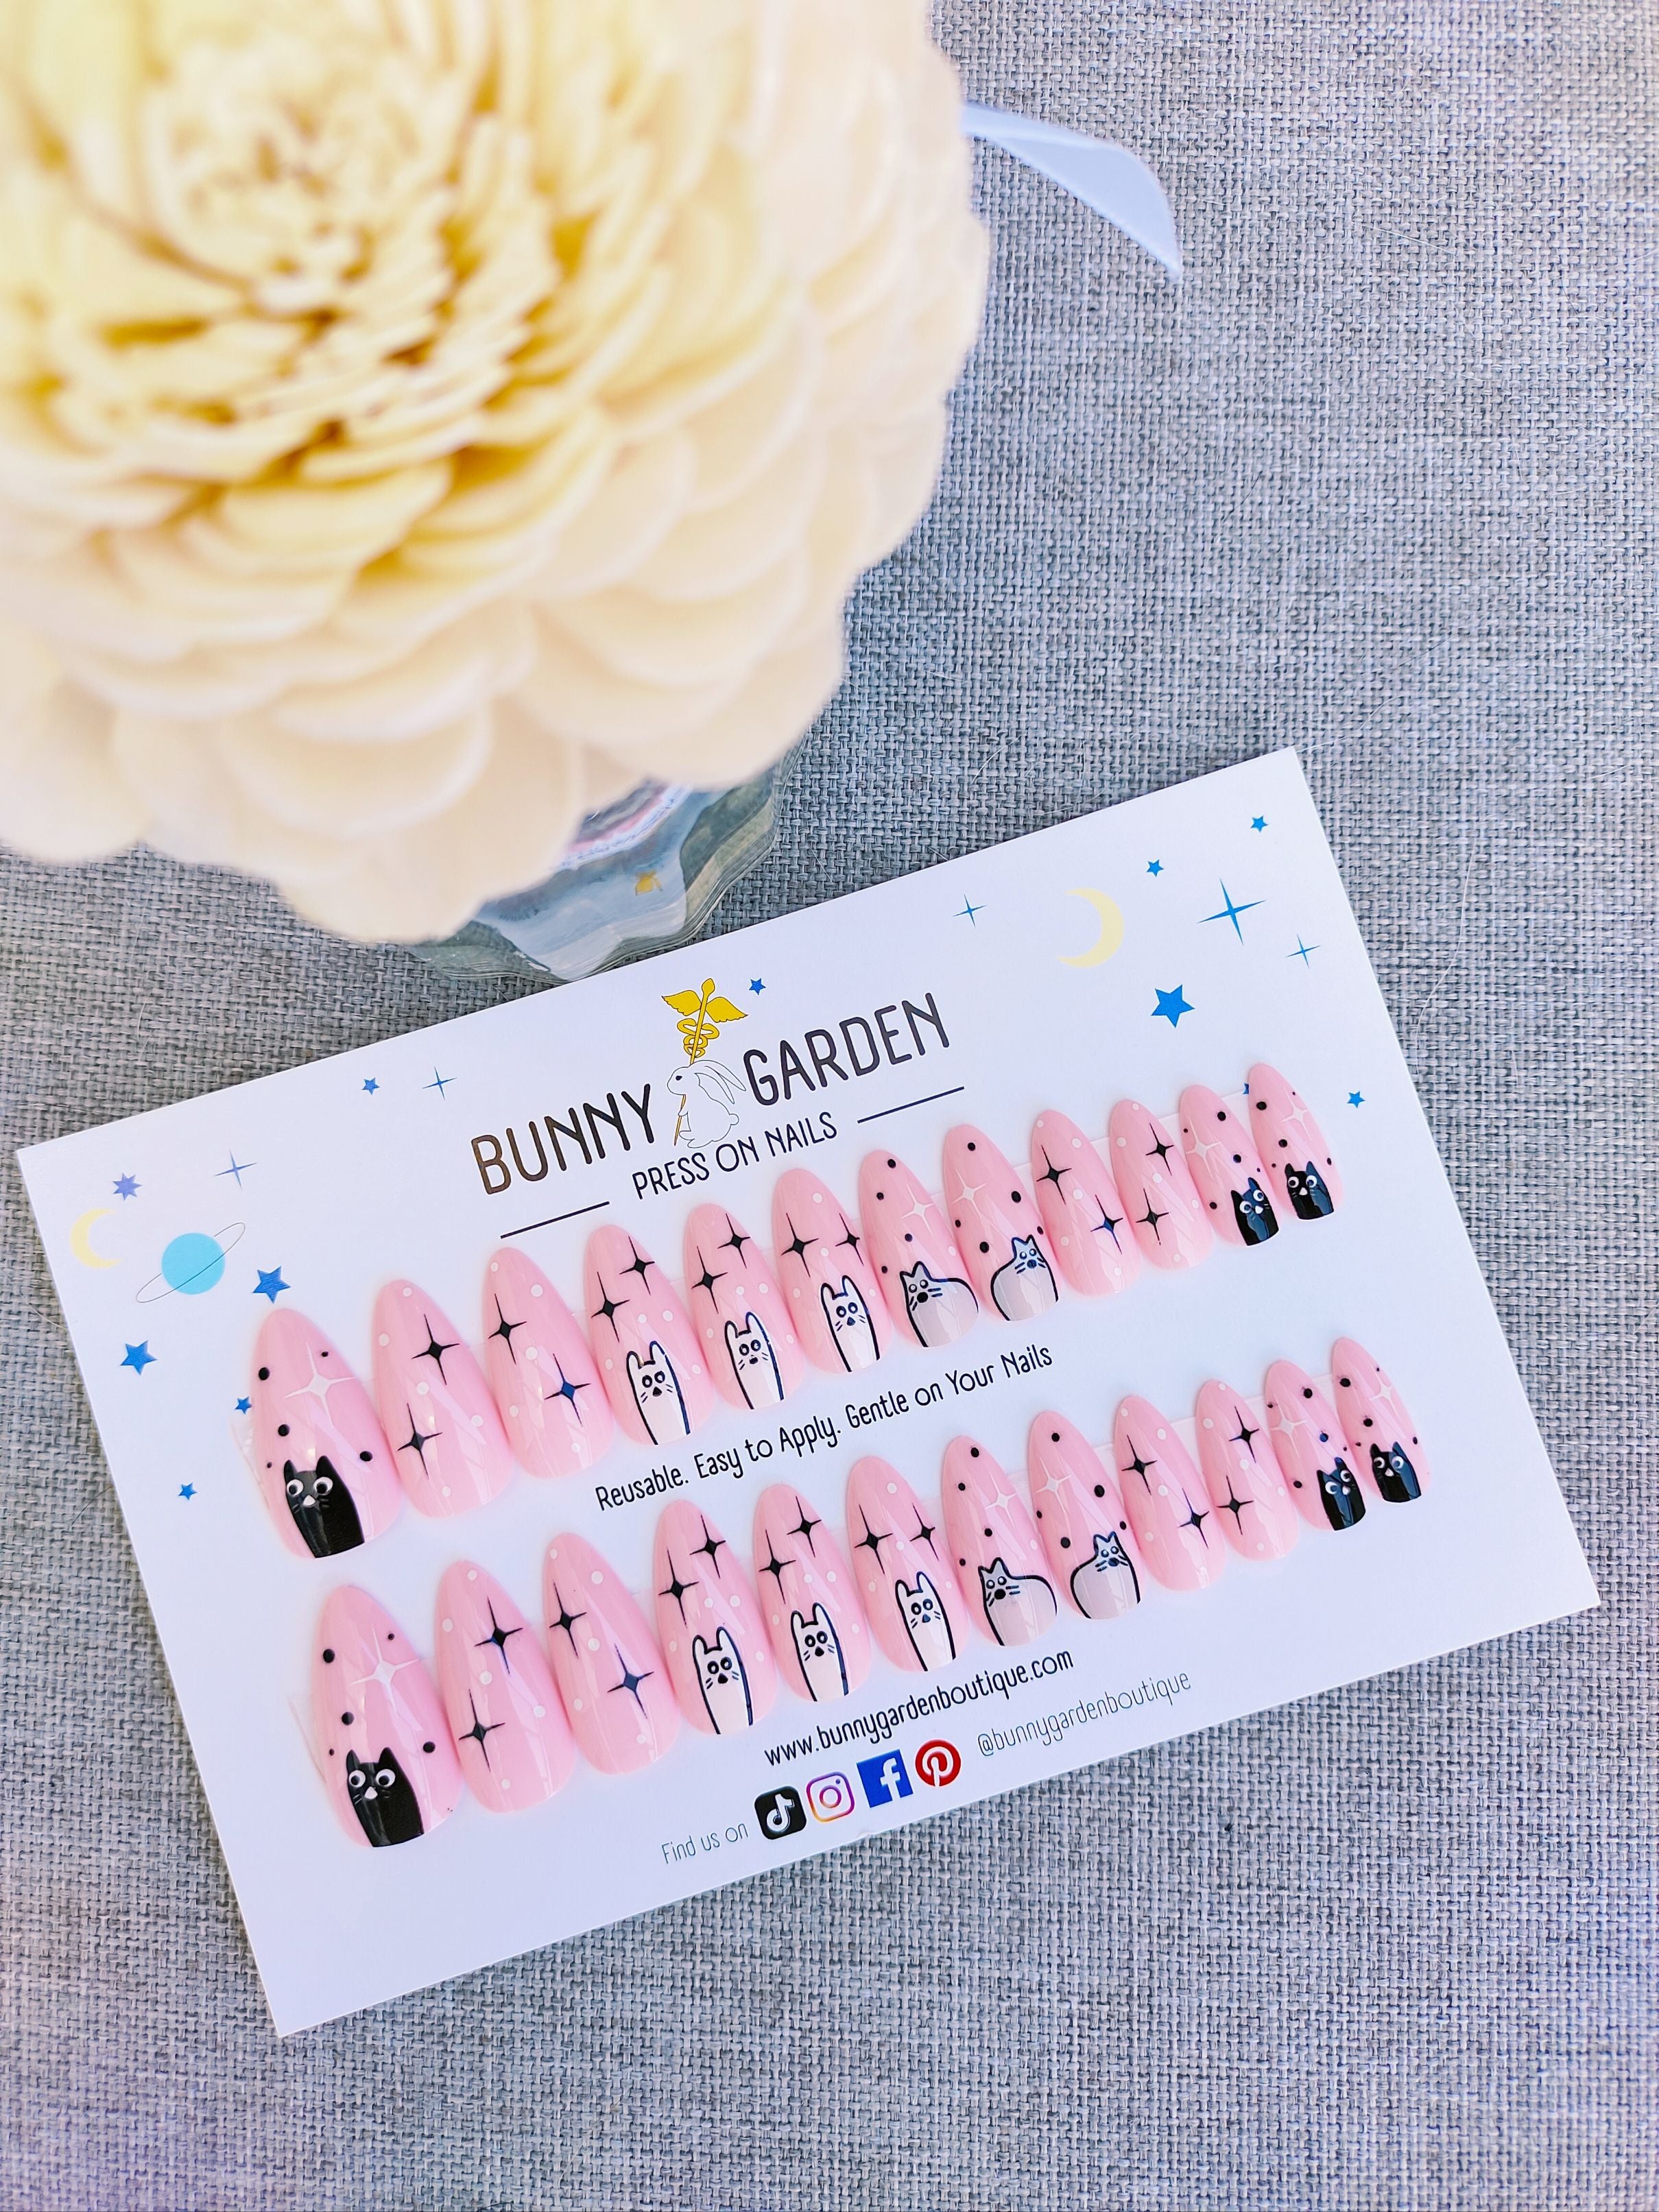 Best Press on Nails NZ & Stick on Nails | Bunny Garden Boutique